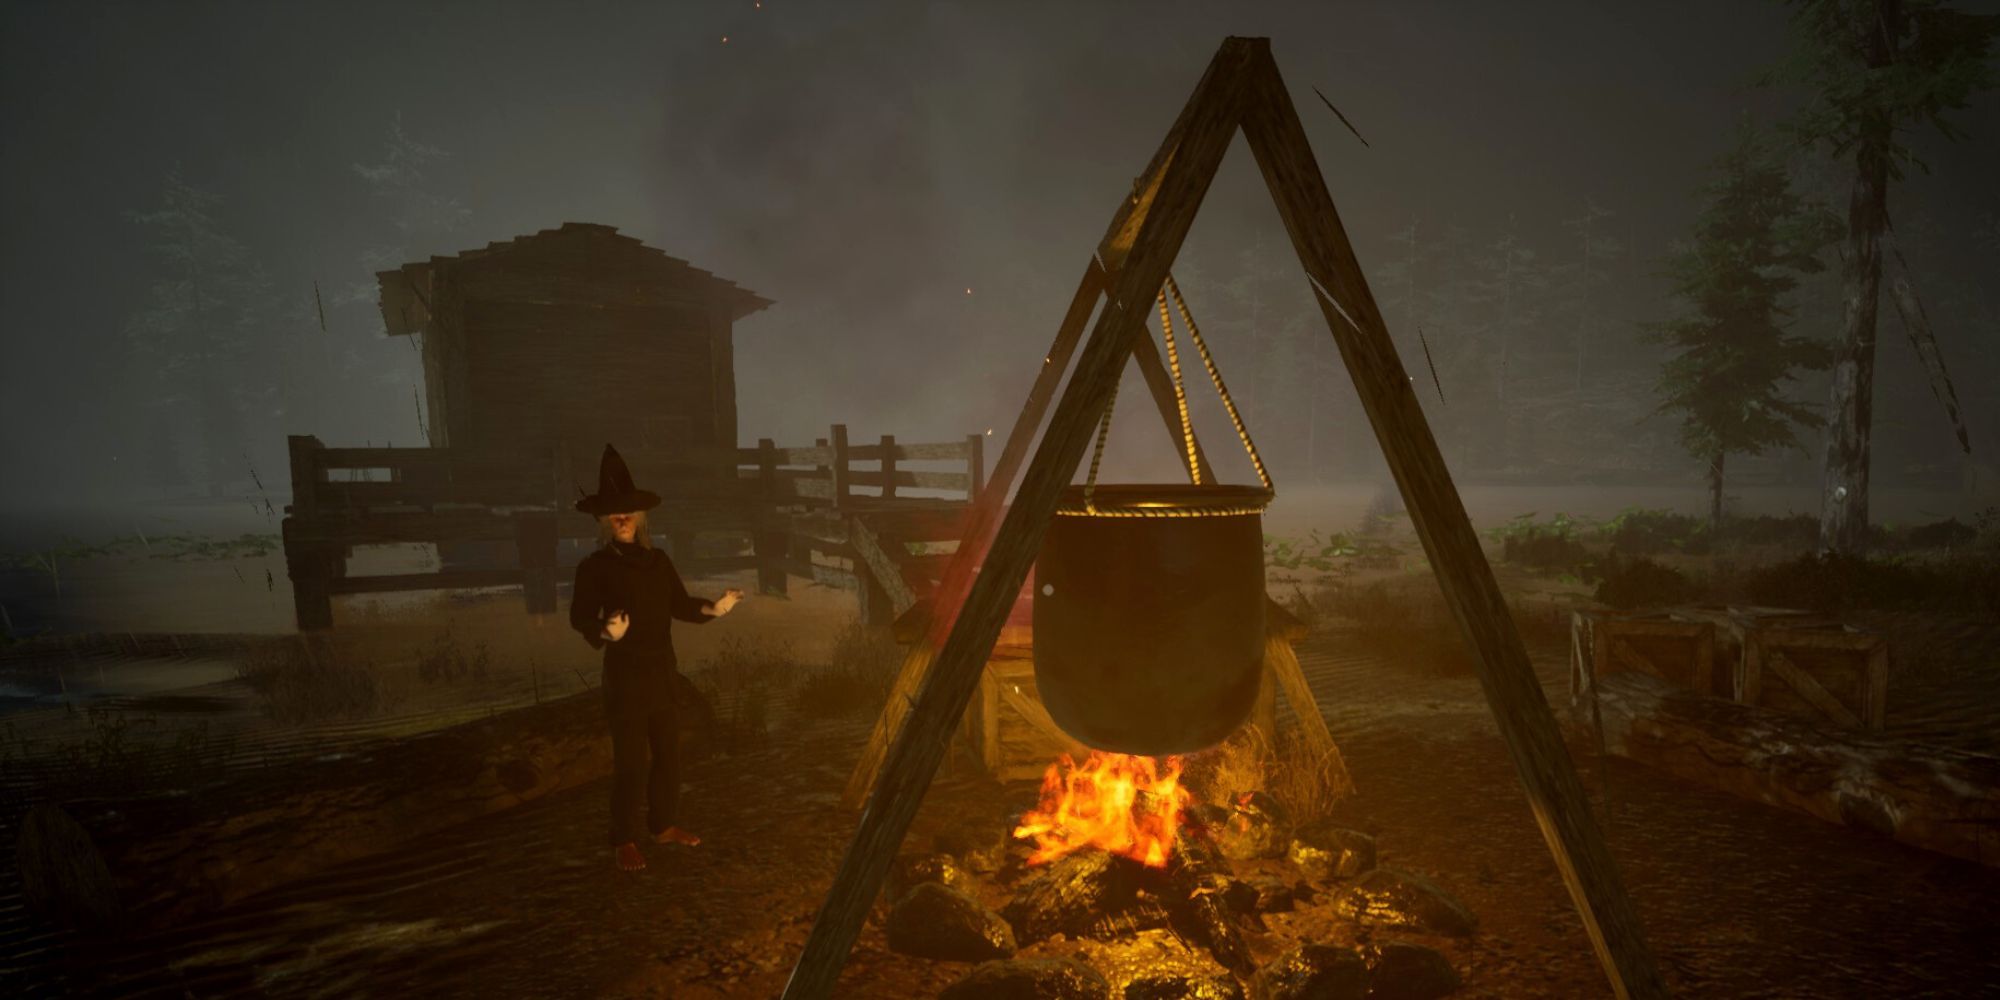 Lizbeth Murkwater warming her hands by the fire from a large cauldron, near a house by the swamp